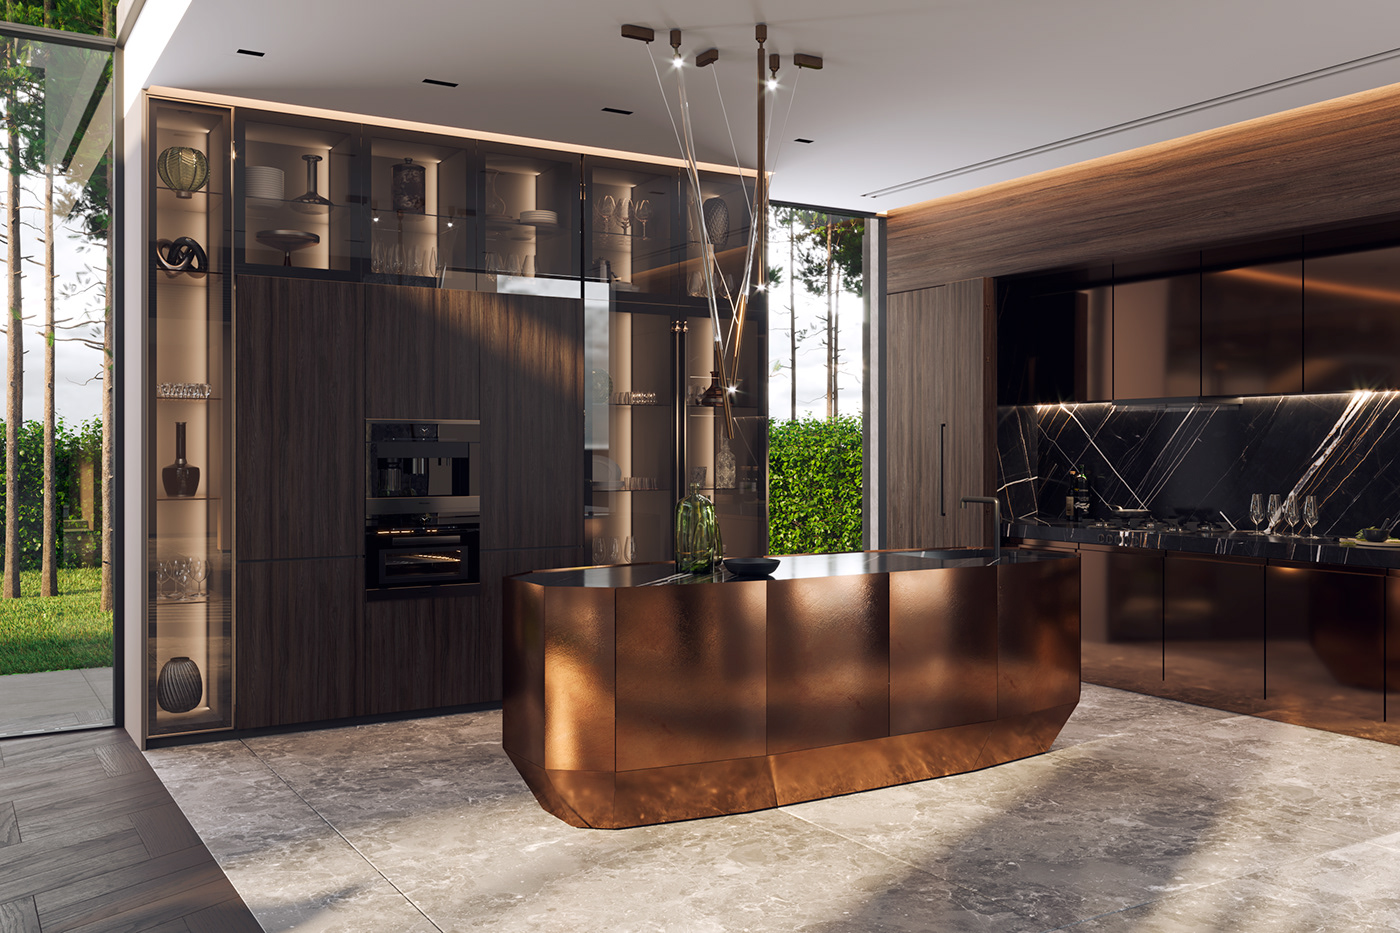 Kitchen design in modern style. Metal, natural wood, marble